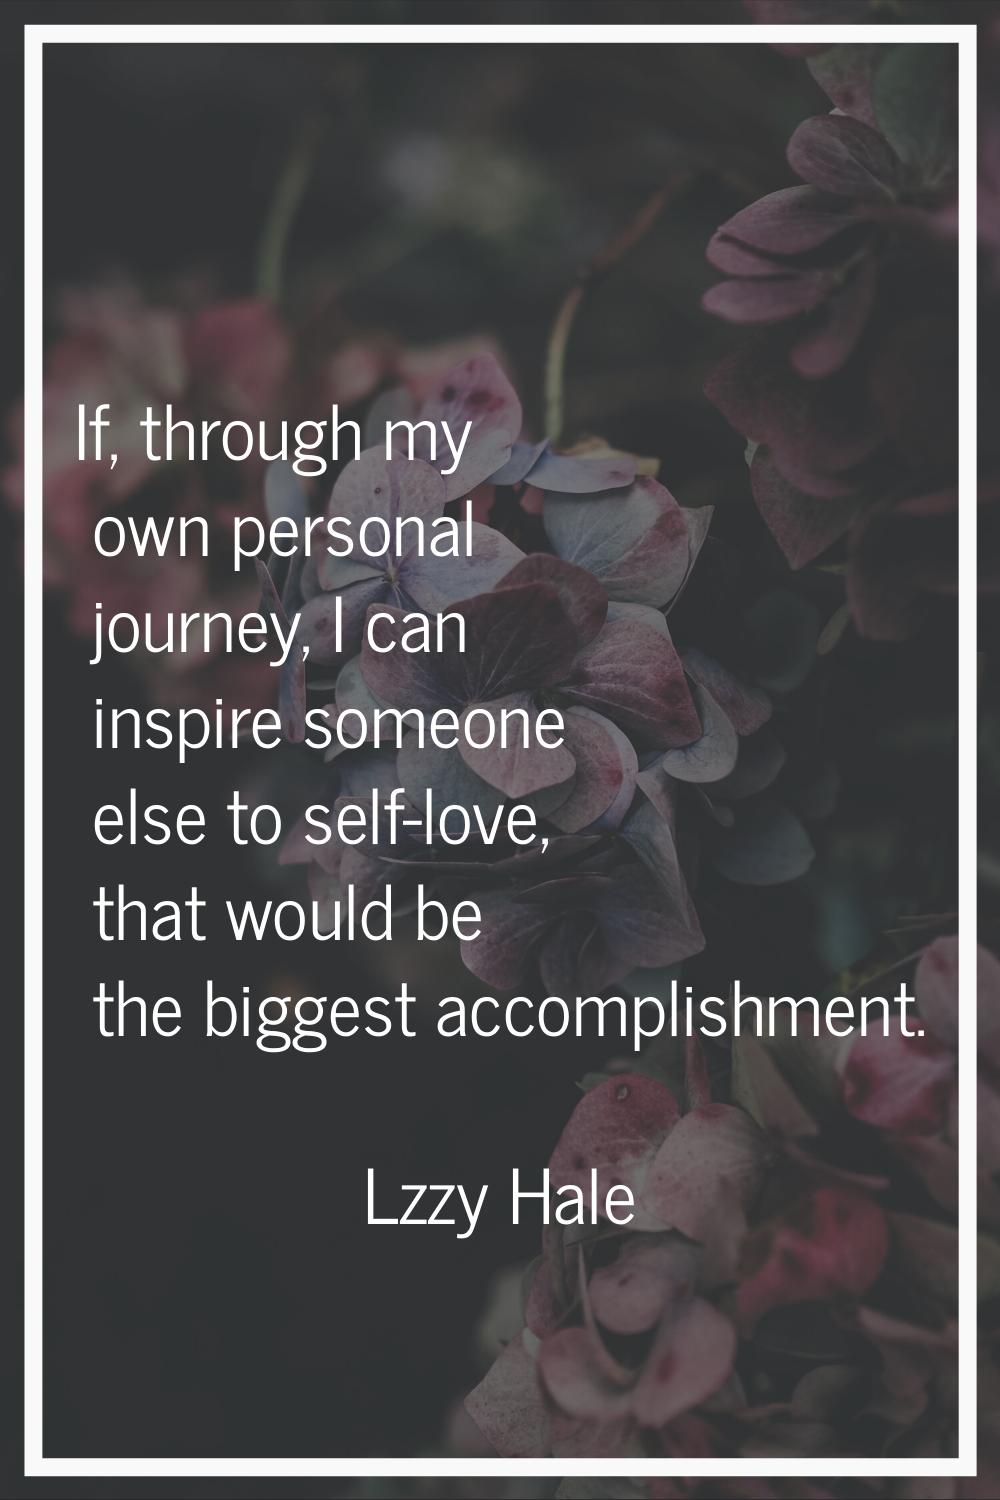 If, through my own personal journey, I can inspire someone else to self-love, that would be the big